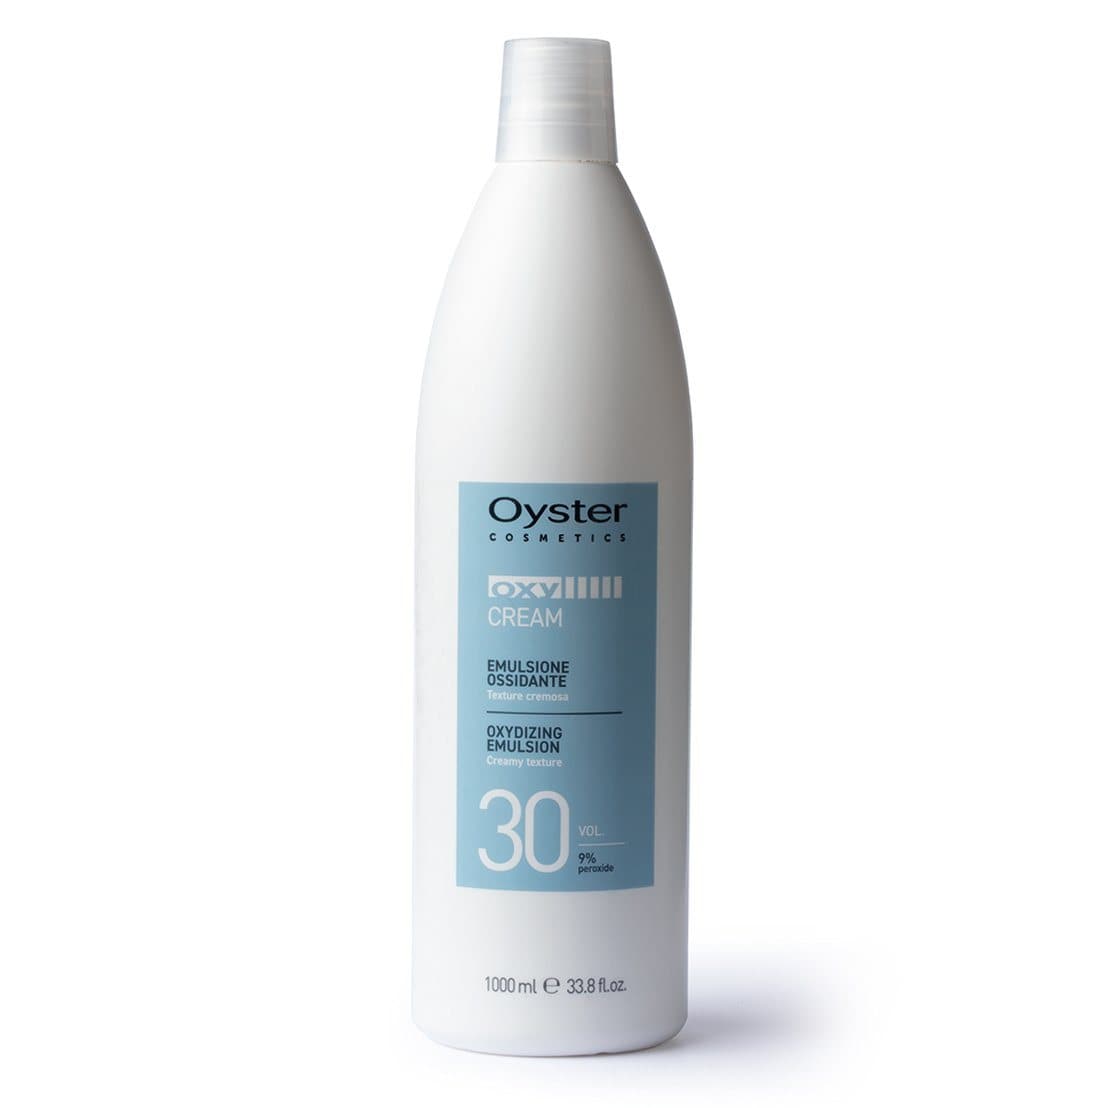 Oyster Oxy Cream Developer | 30 vol - 9% Peroxide HAIR COLOR OYSTER 1000ml / 1L 